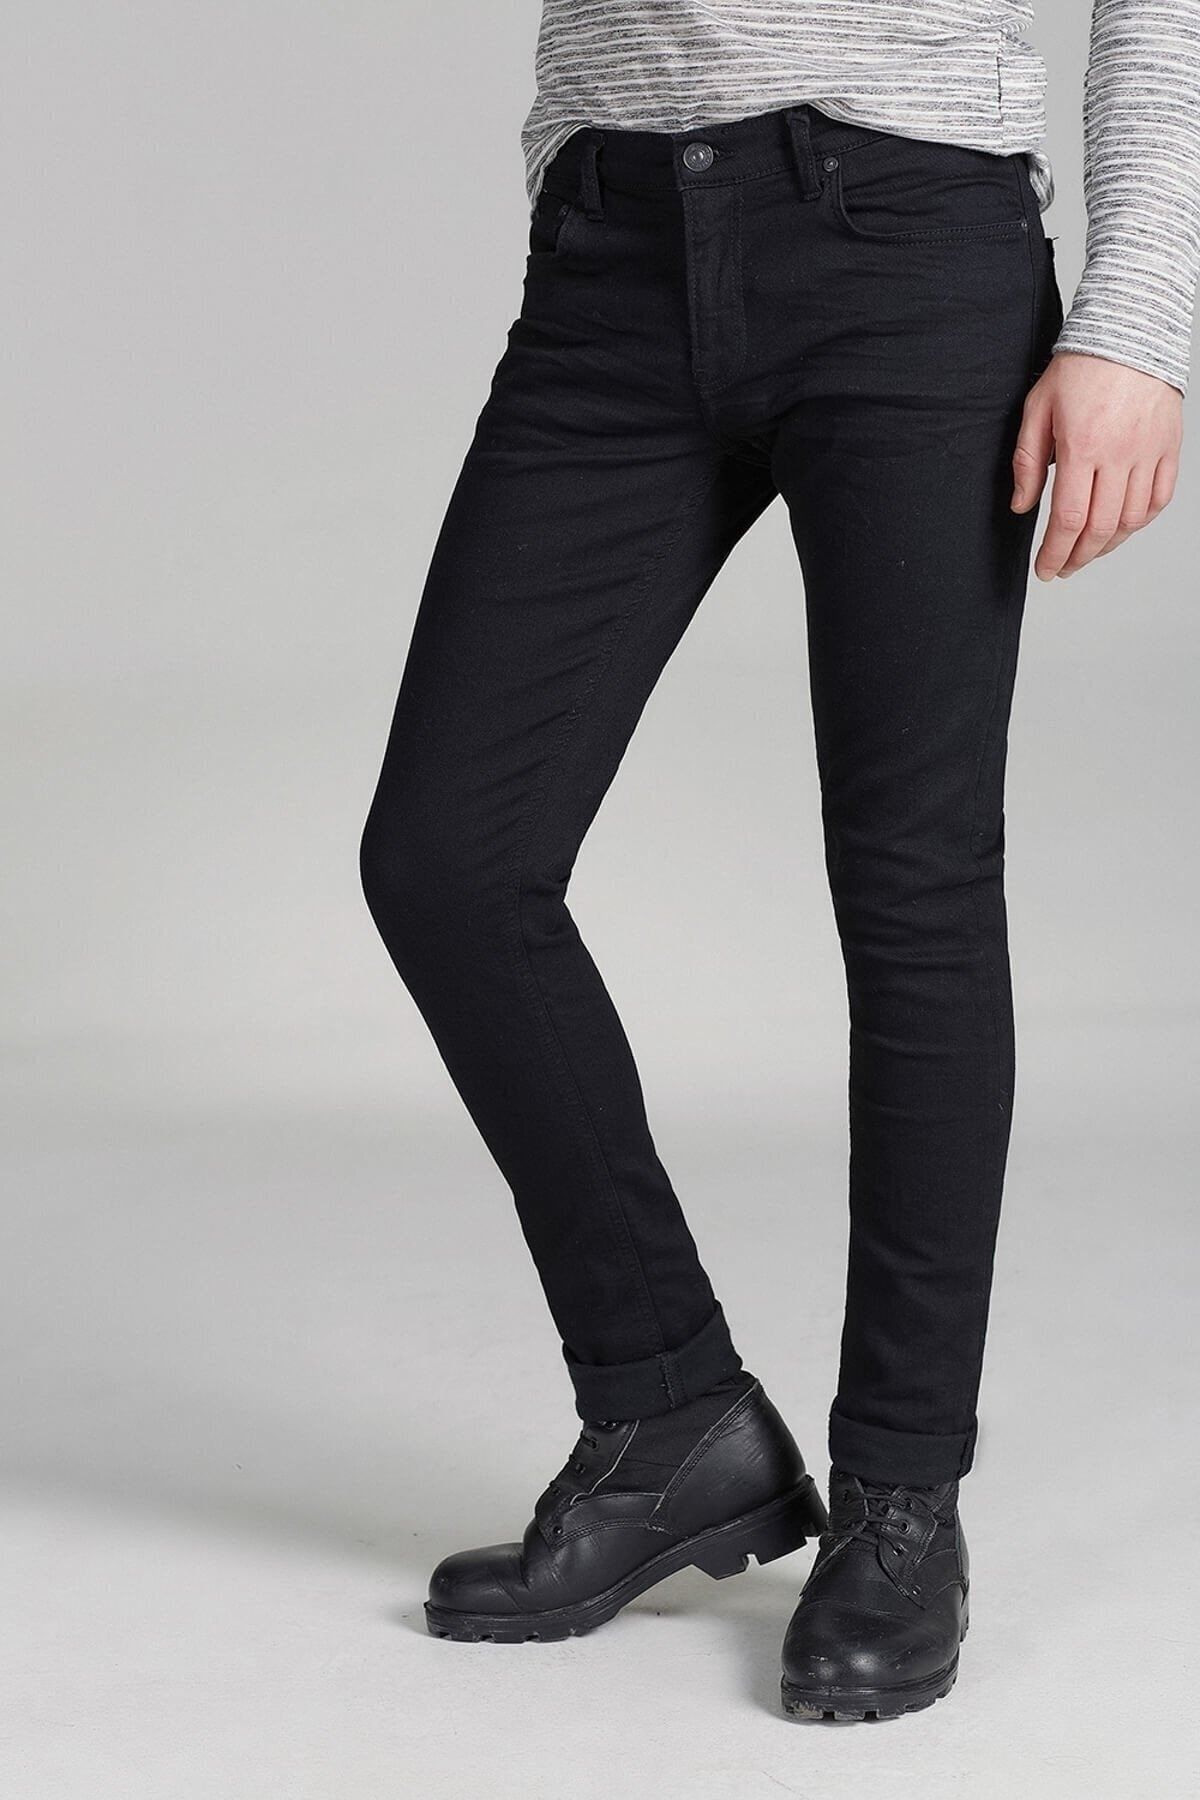 Ltb Smarty Y Black Jeans 010095145414911200